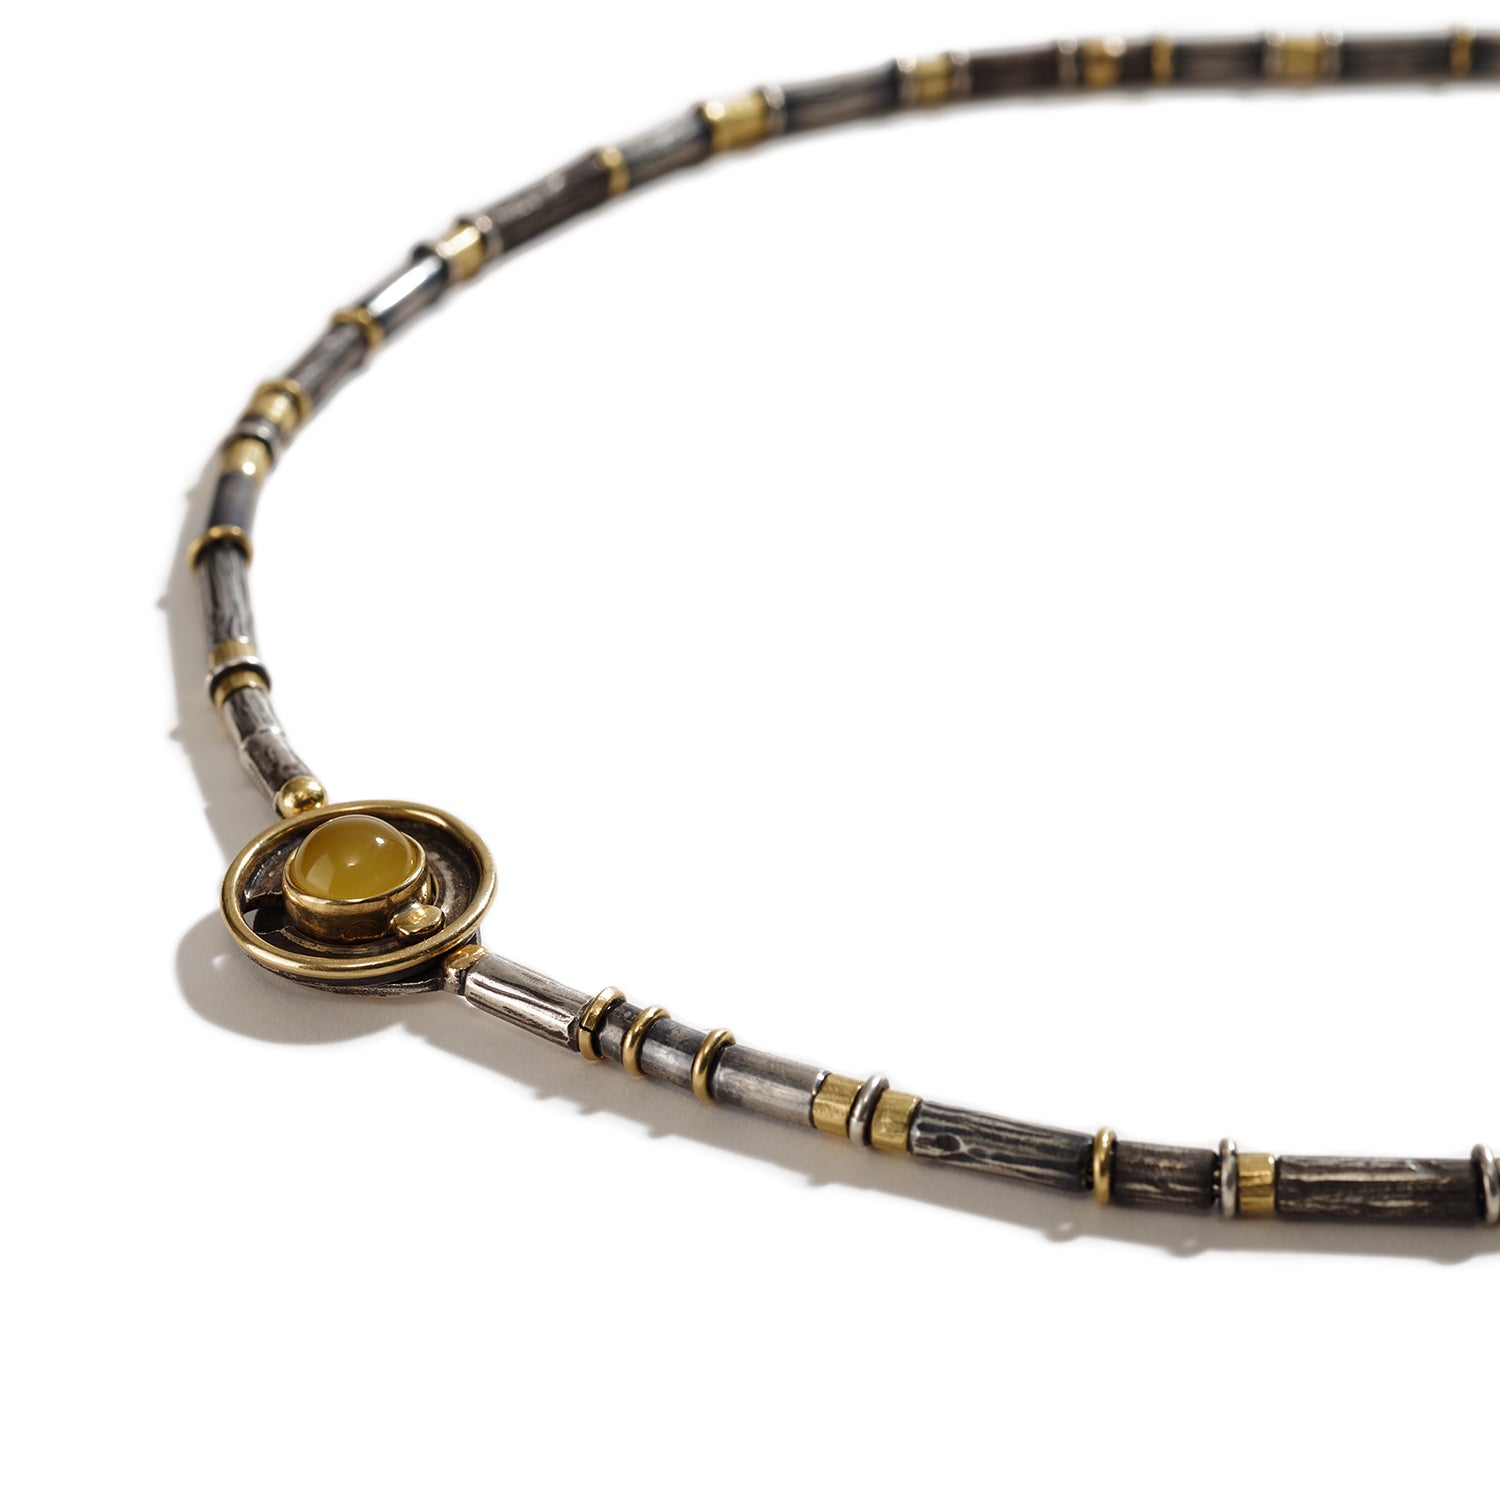 Necklace in Gold, Silver, Yellow, and Black Stones